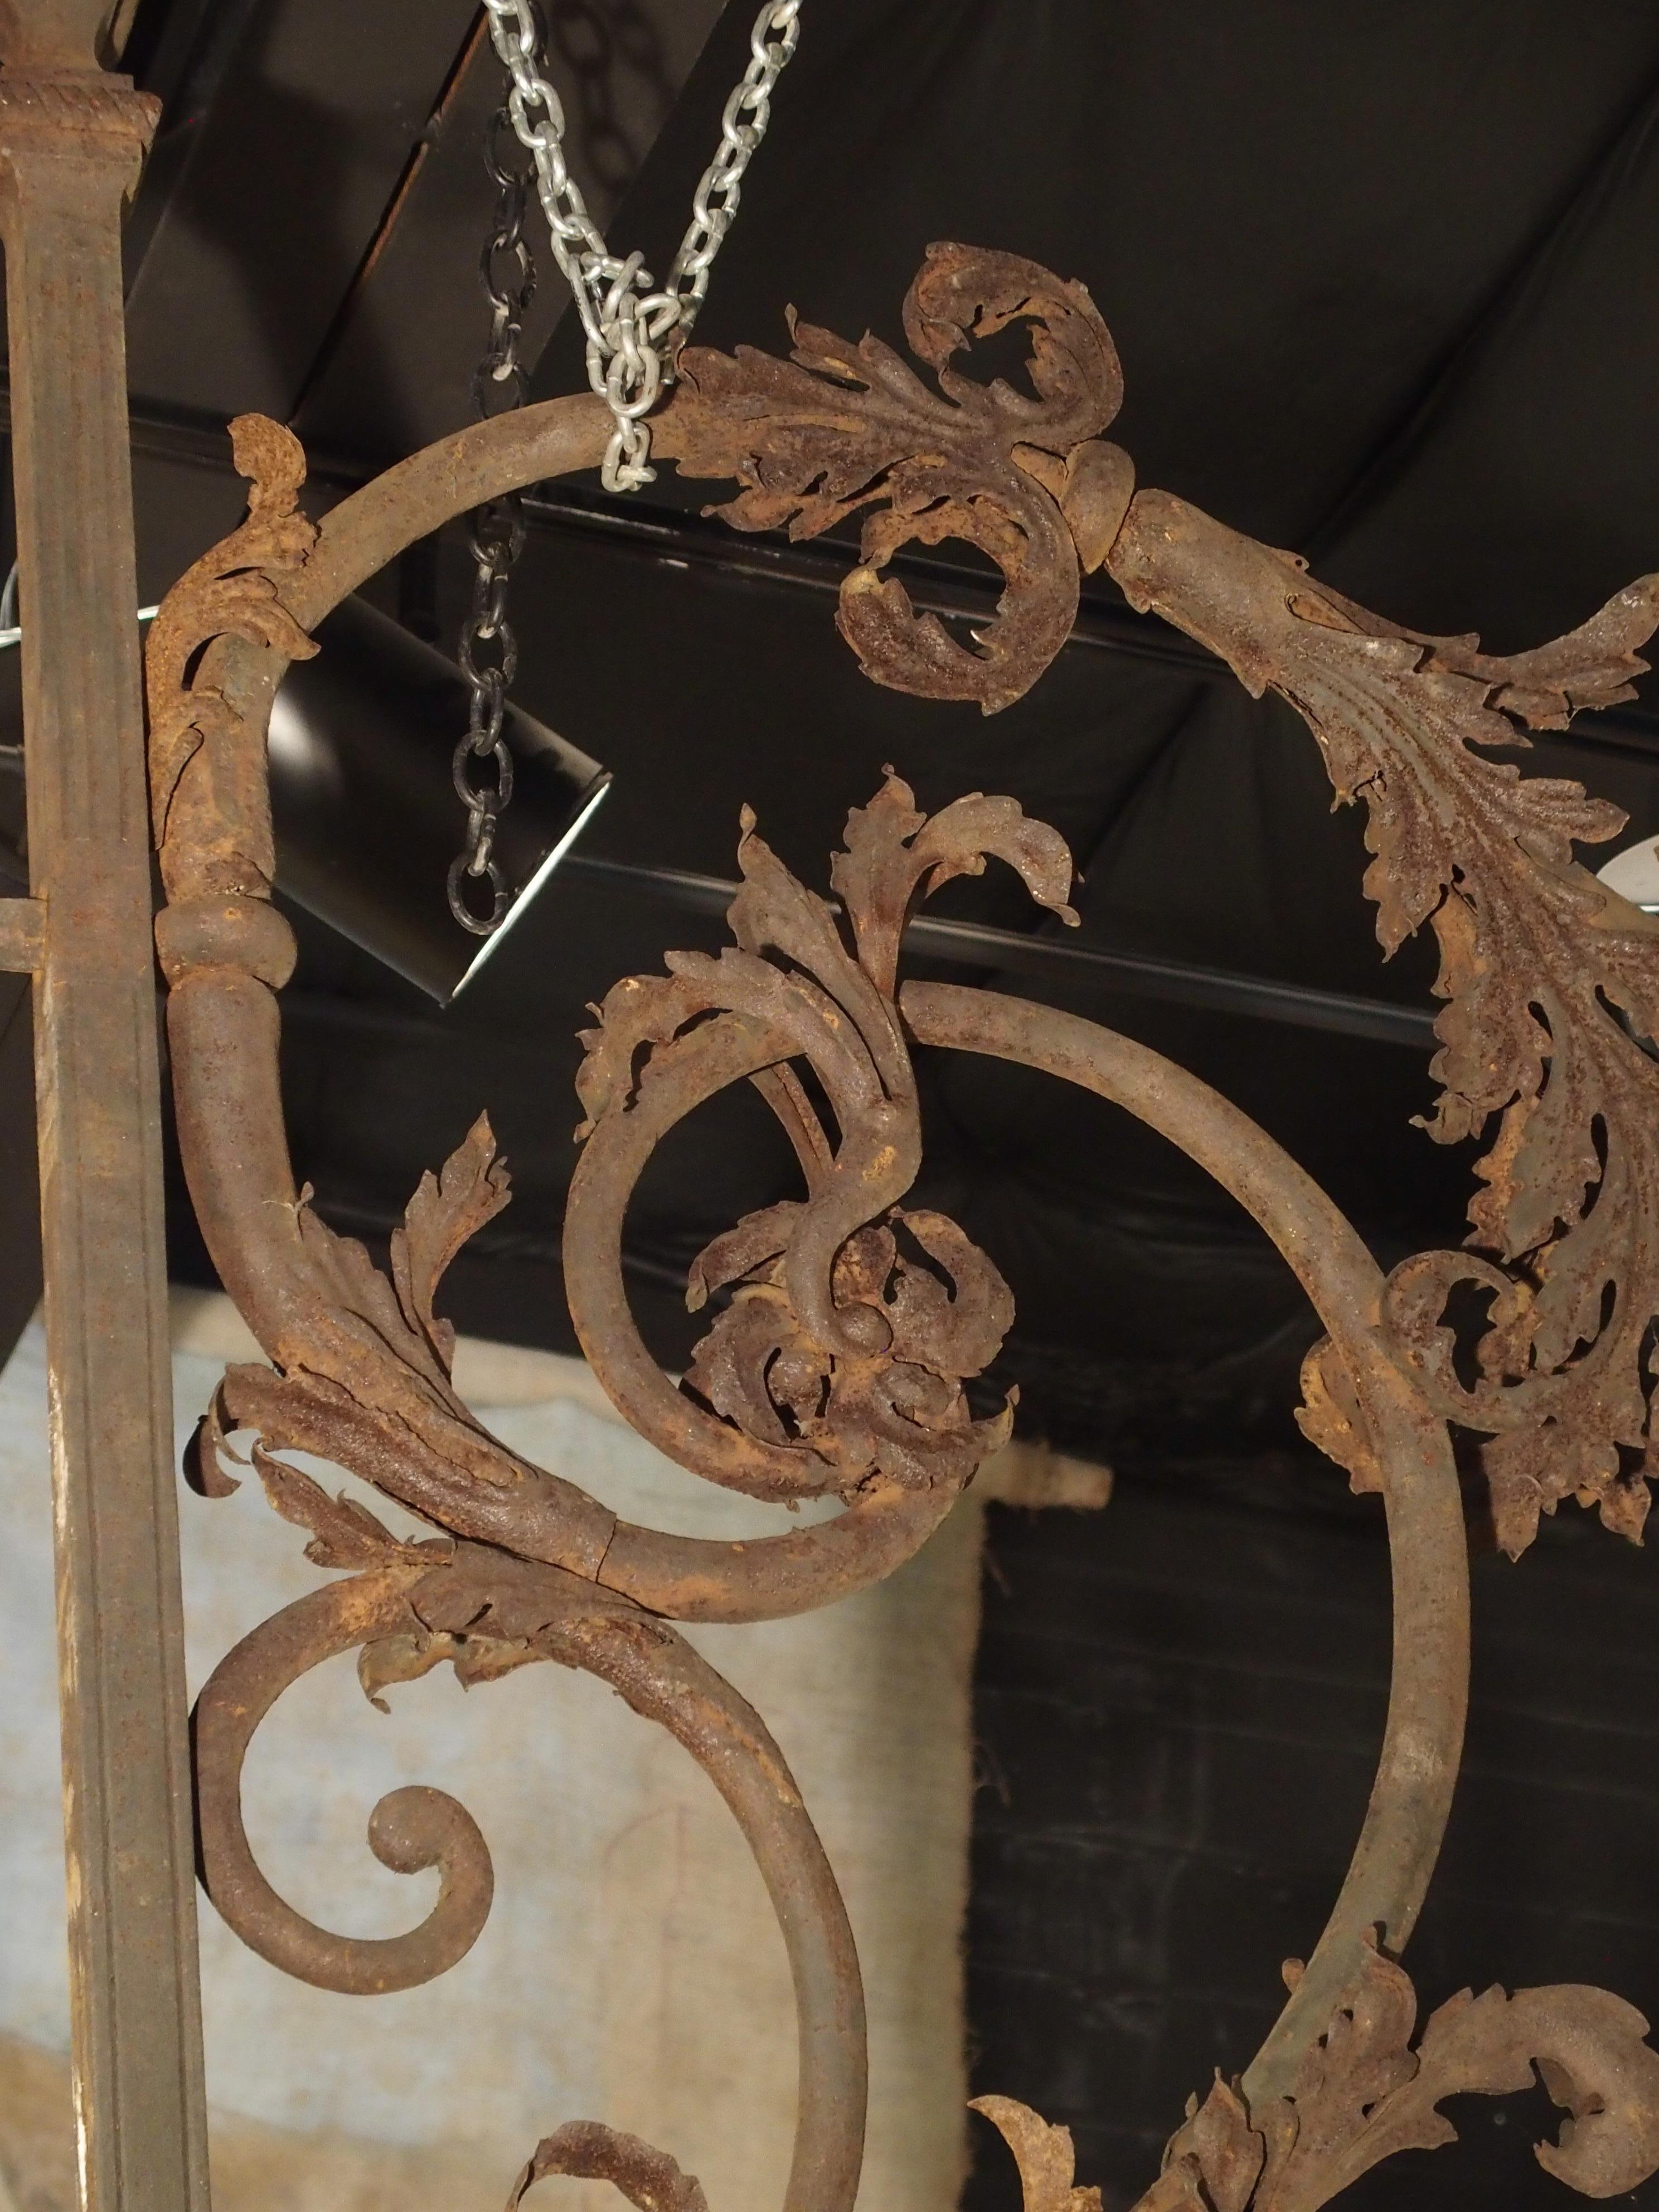 From the 1800’s, this very tall forged iron lantern holder is from the city of Poitiers, France.  Its form is graceful and flowing with C-and S-Scroll iron rods adorned with an abundance of acanthus leaves.  The Grand'Goule is the name of the large